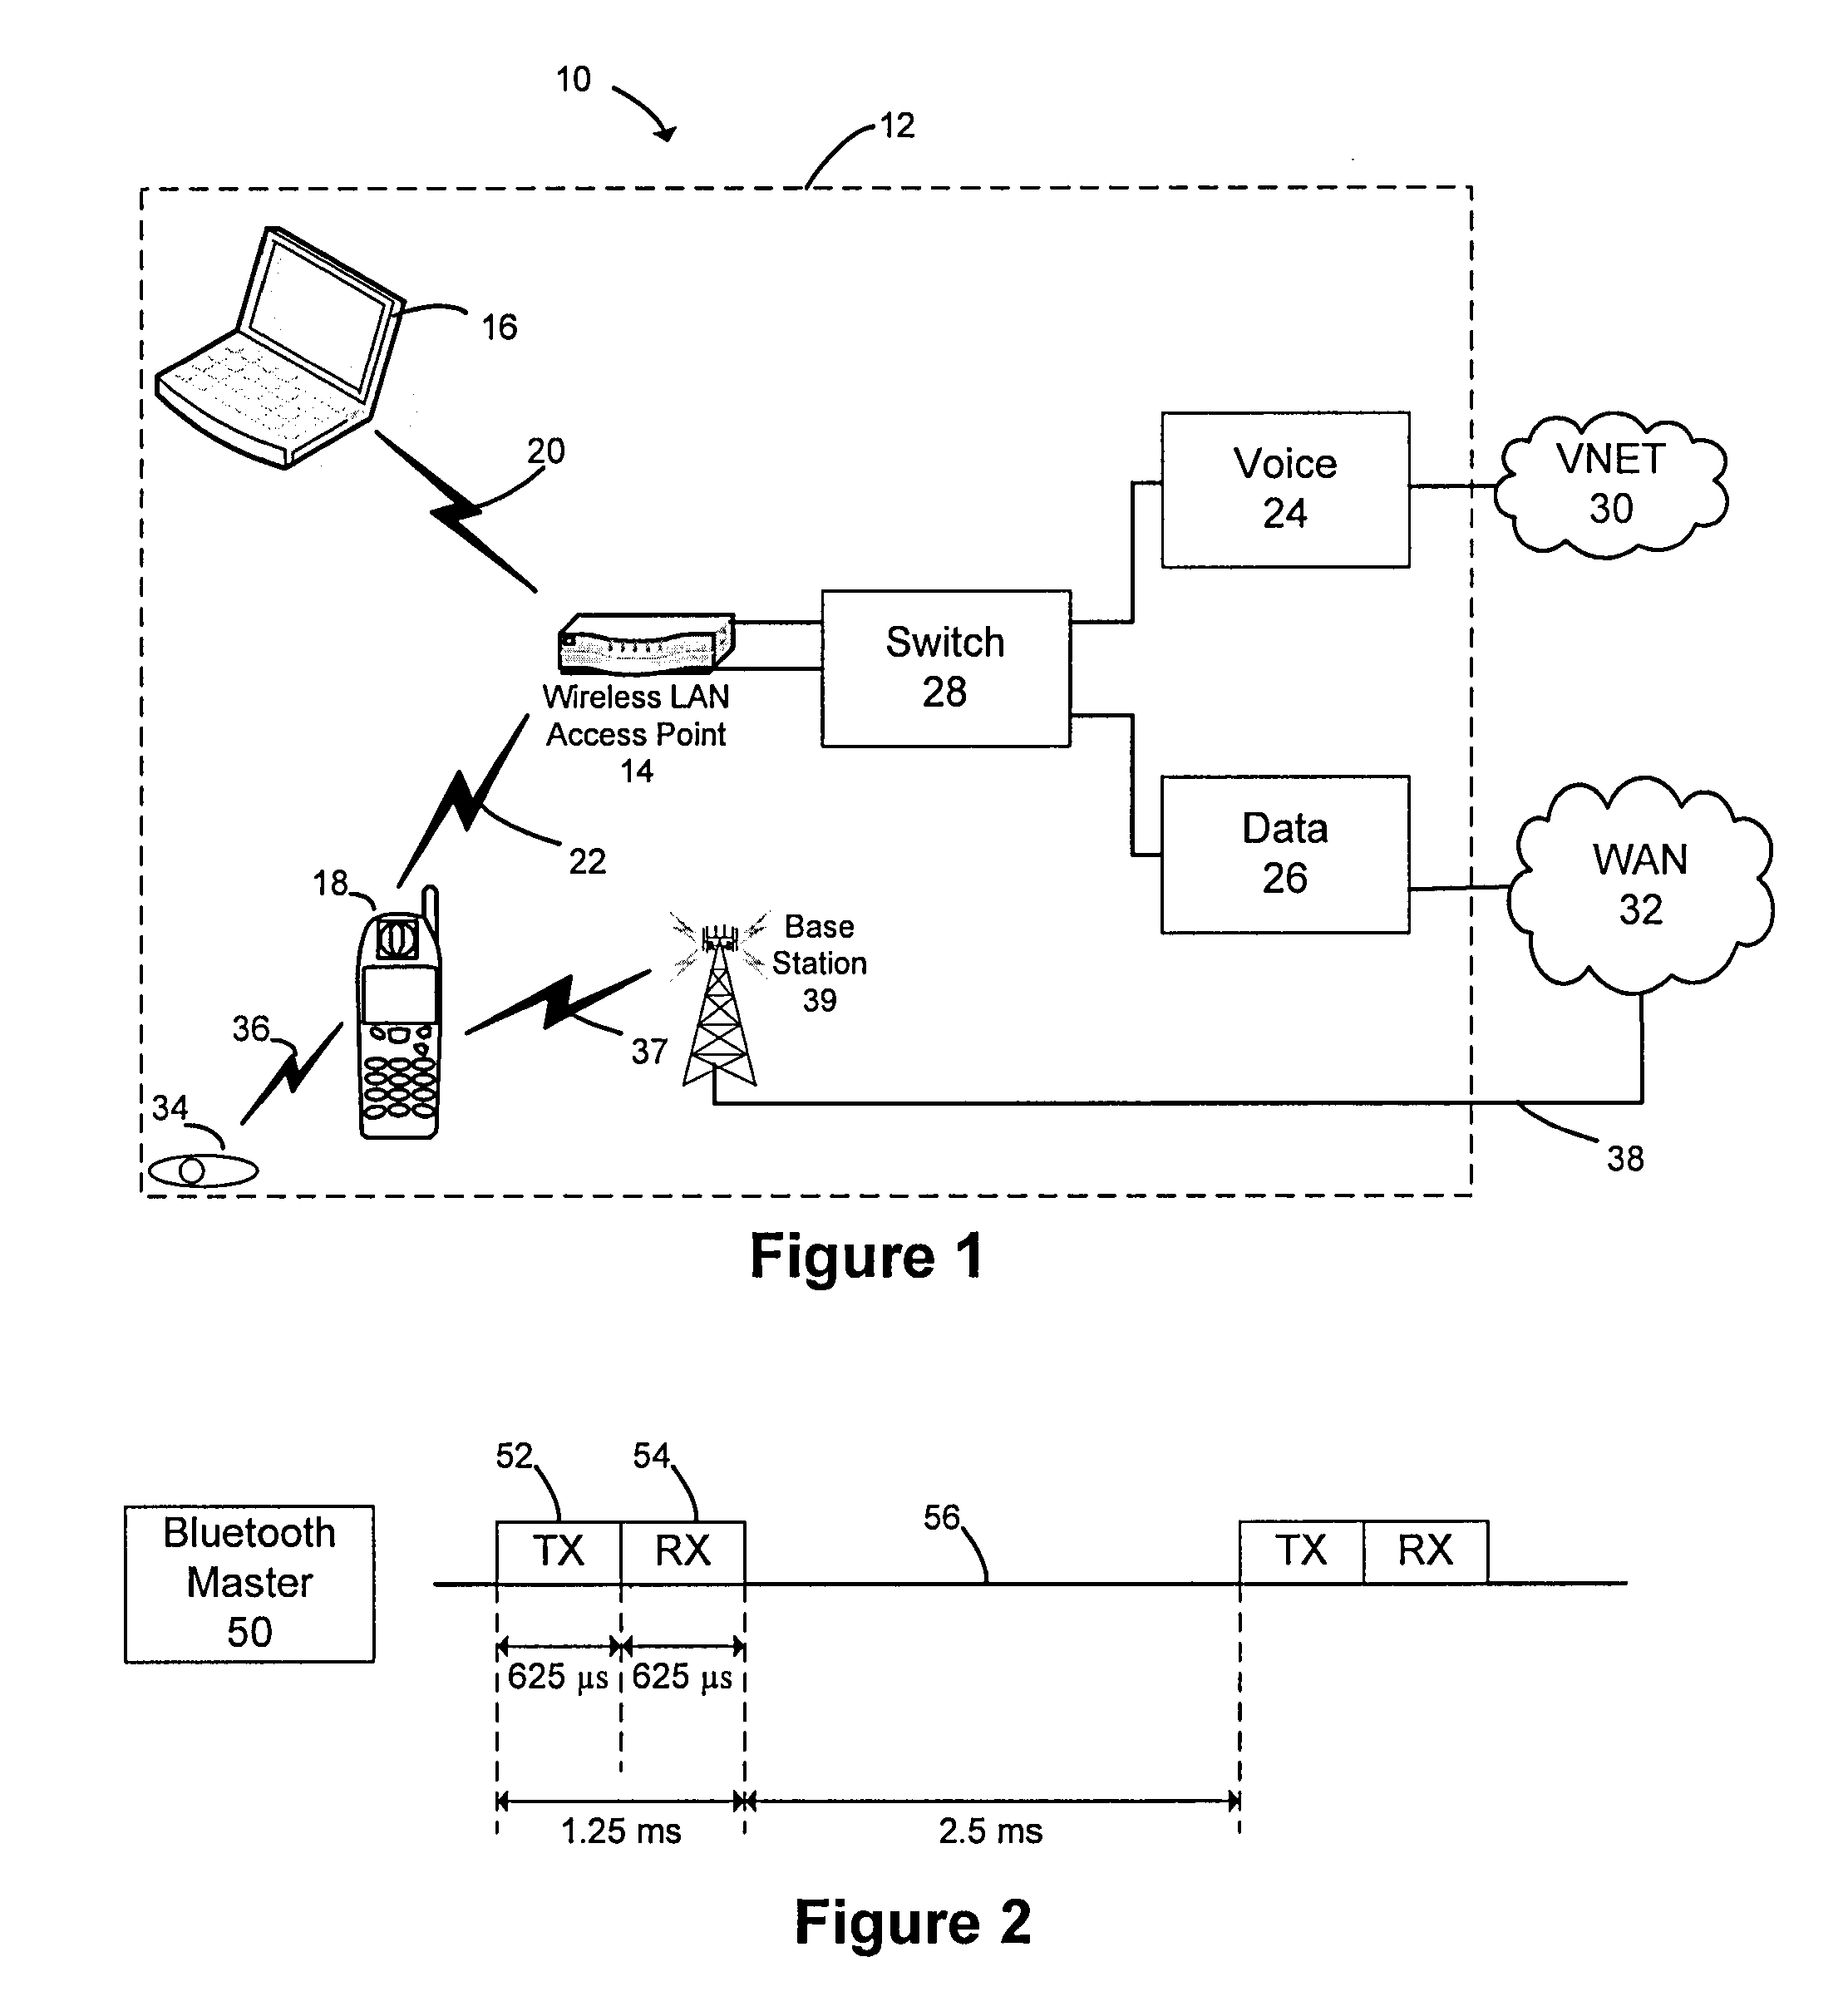 Apparatus and method to improve WLAN performance in a dual WLAN modality environment